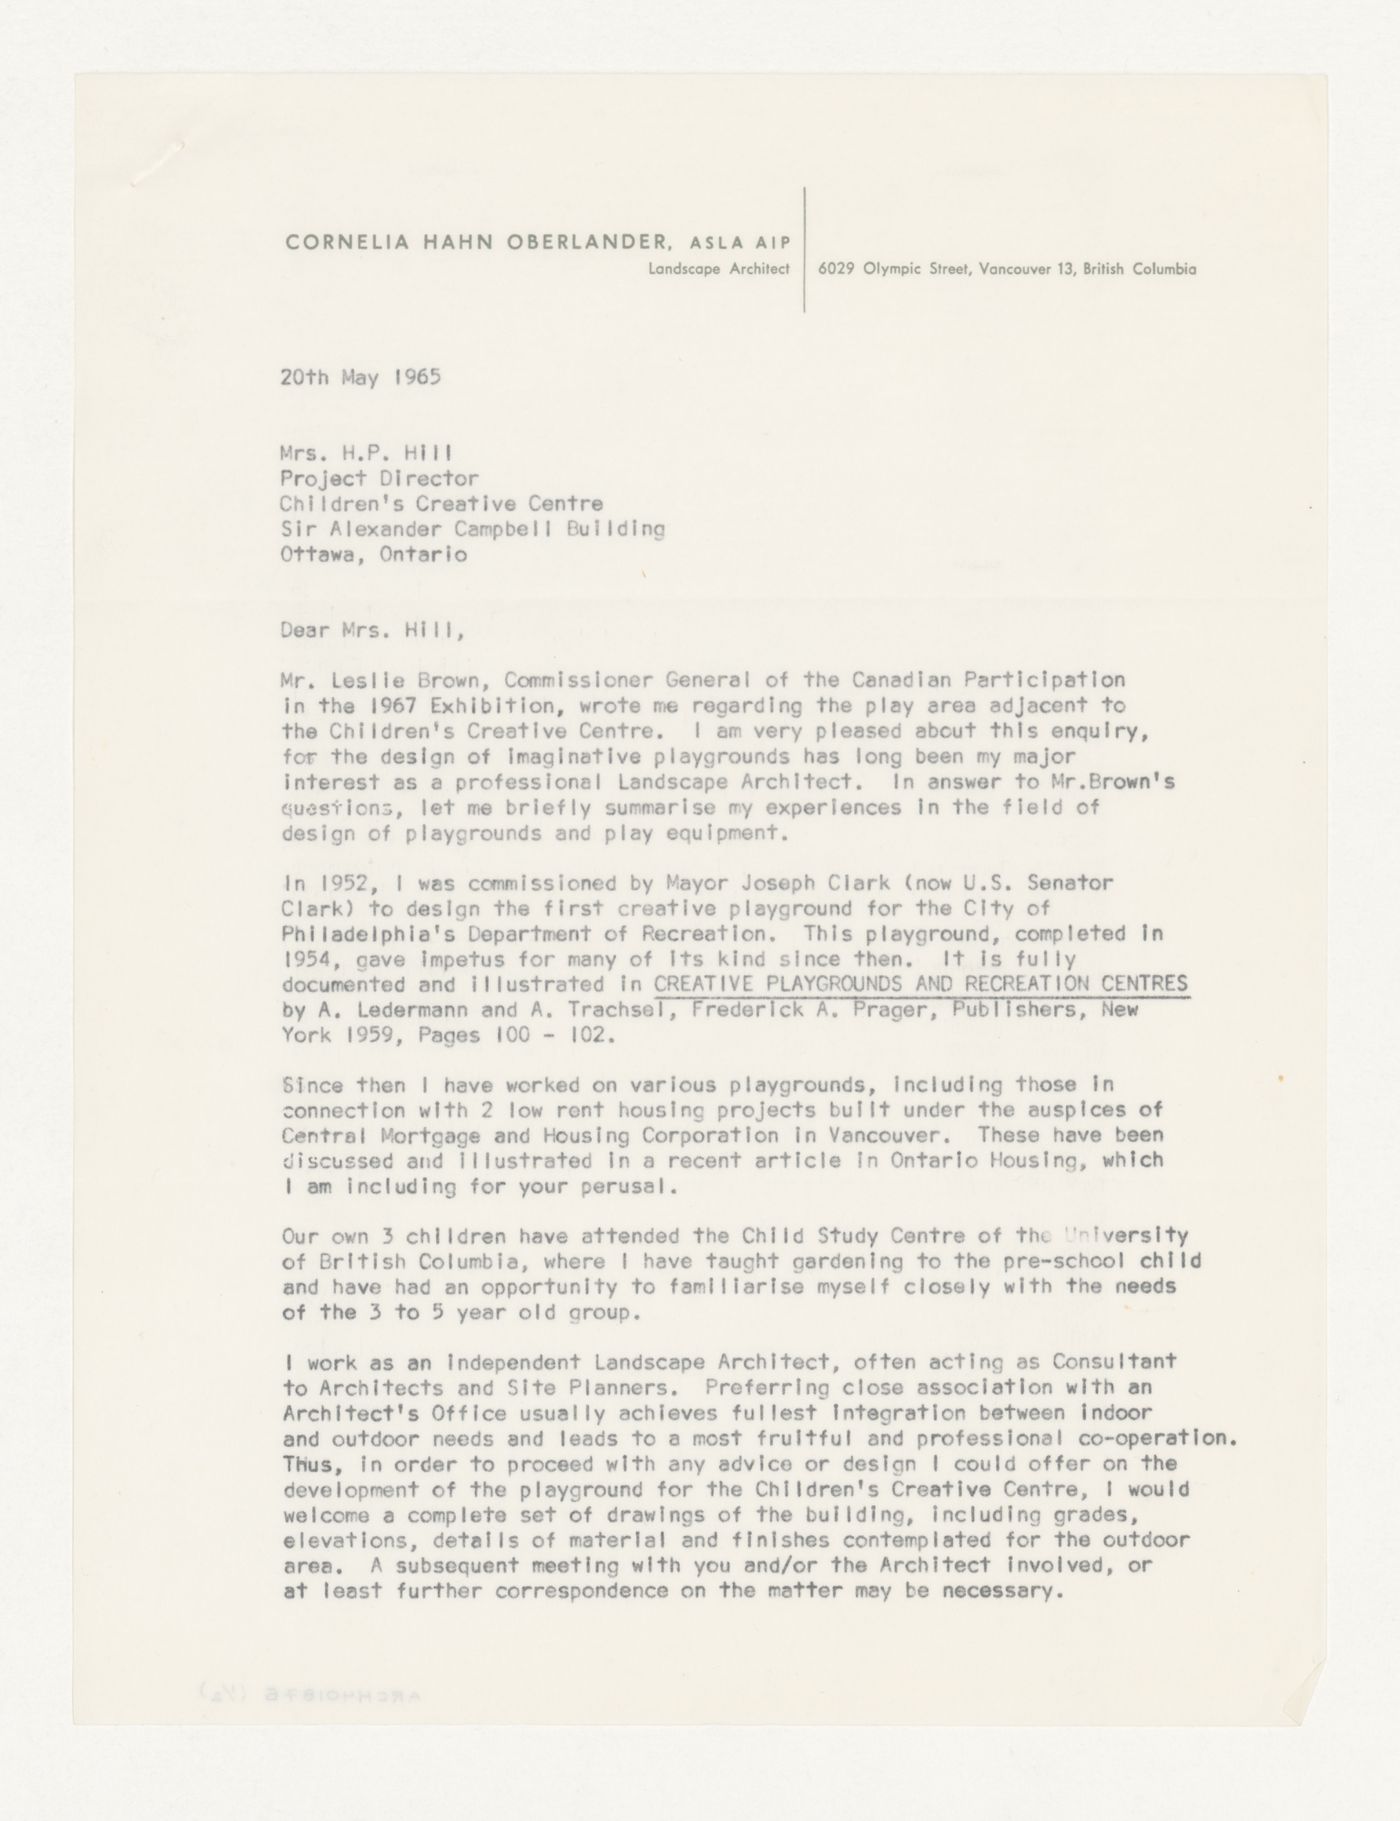 Letter from Cornelia Hahn Oberlander to Project Director expressing interest in designing playground for Children's Creative Centre, Canadian Federal Pavilion, Expo '67, Montréal, Québec